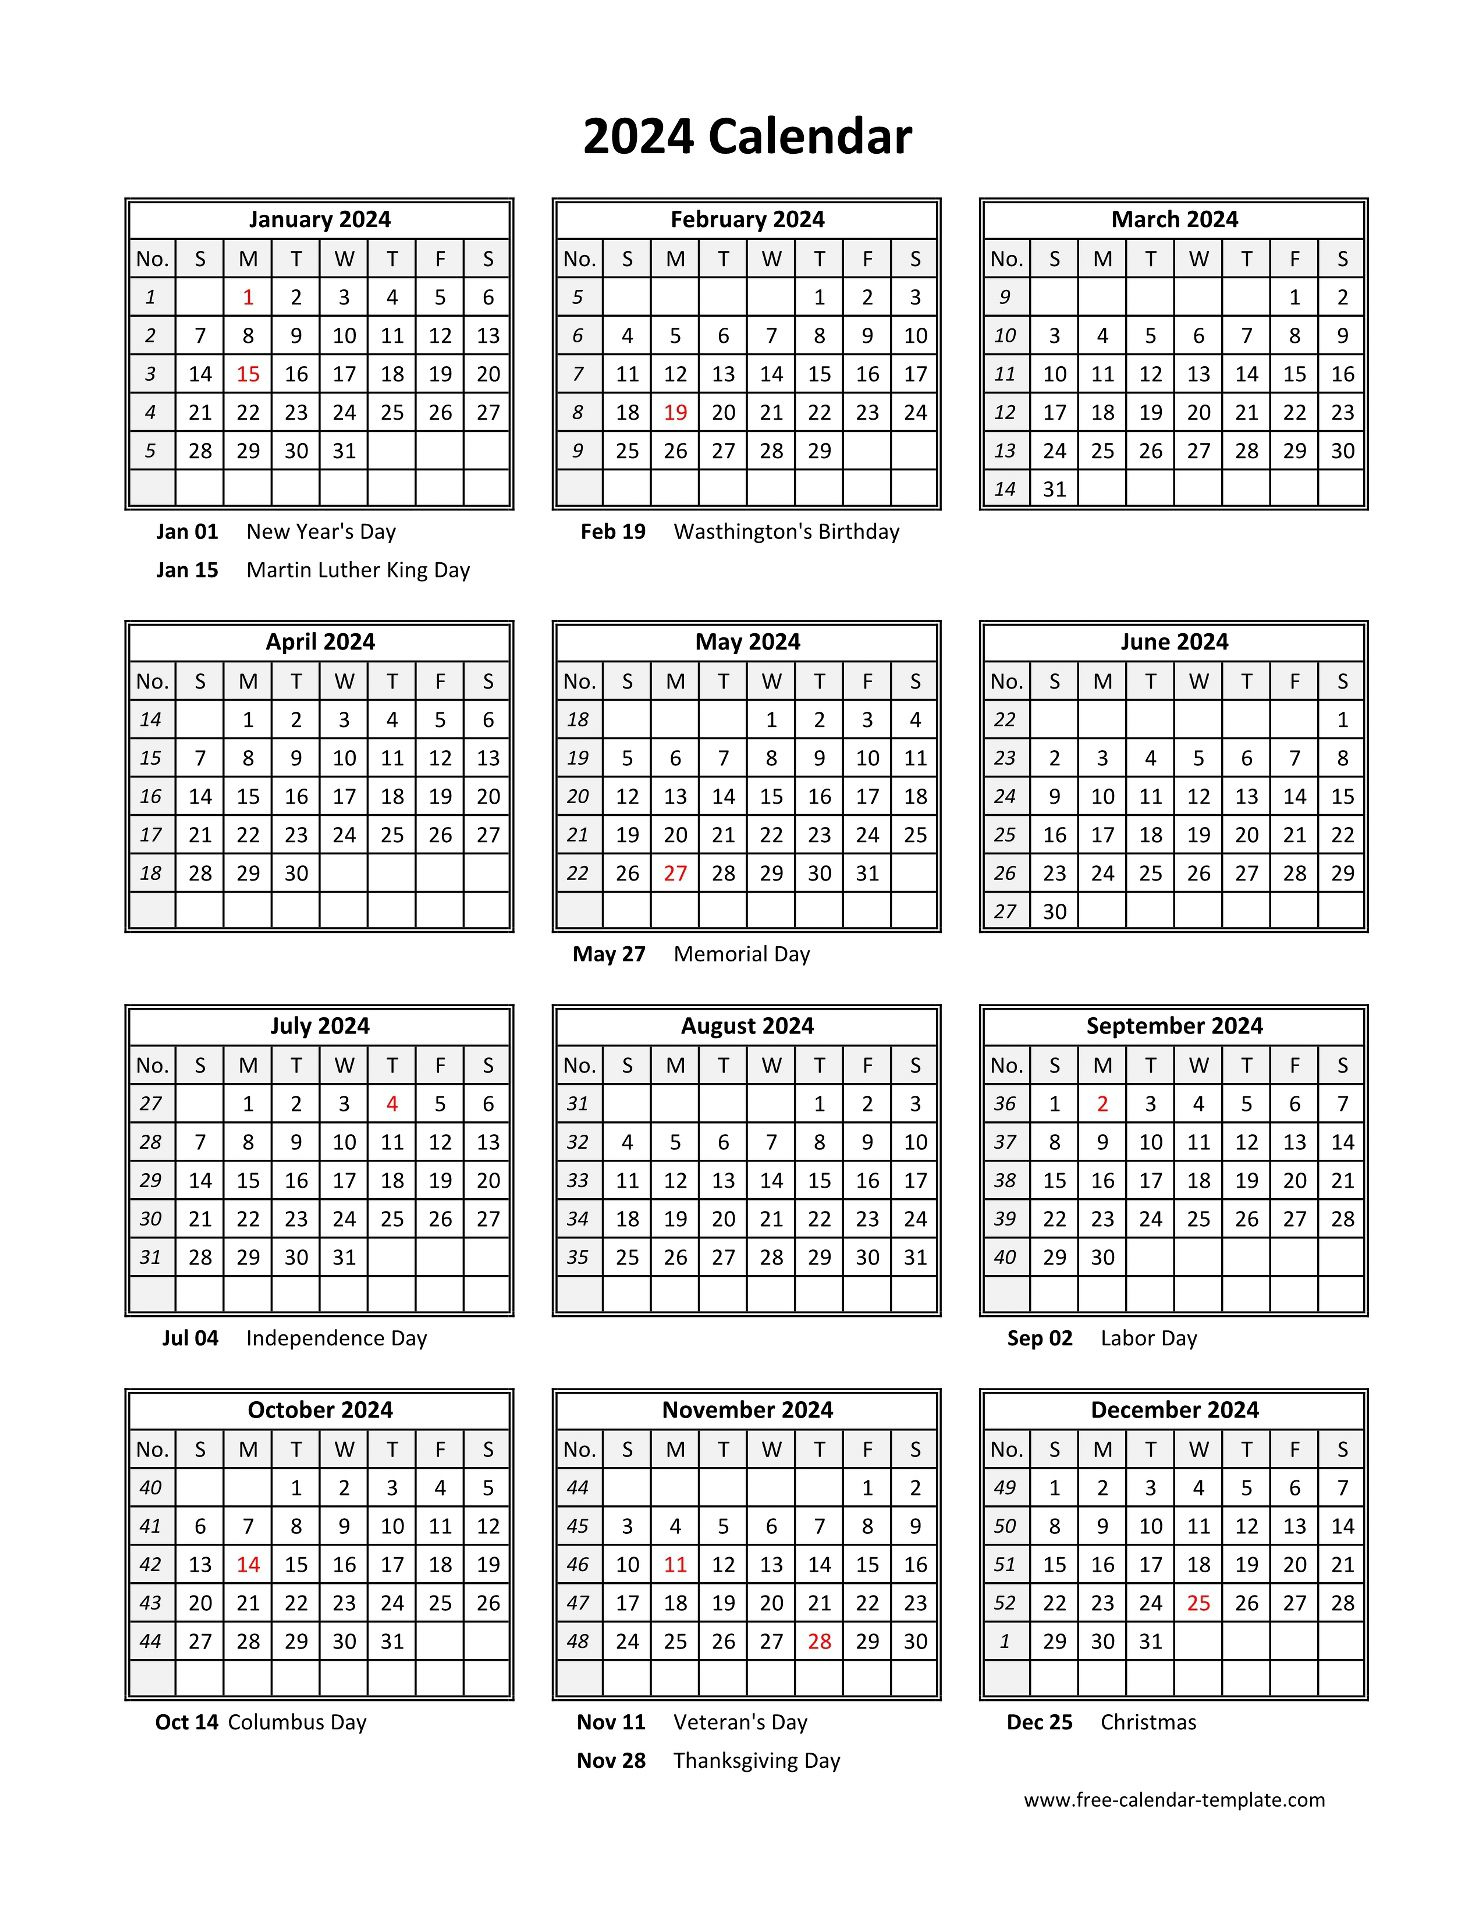 Yearly Printable Calendar 2024 With Holidays | Free-Calendar | 2024 Yearly Calendar Blank